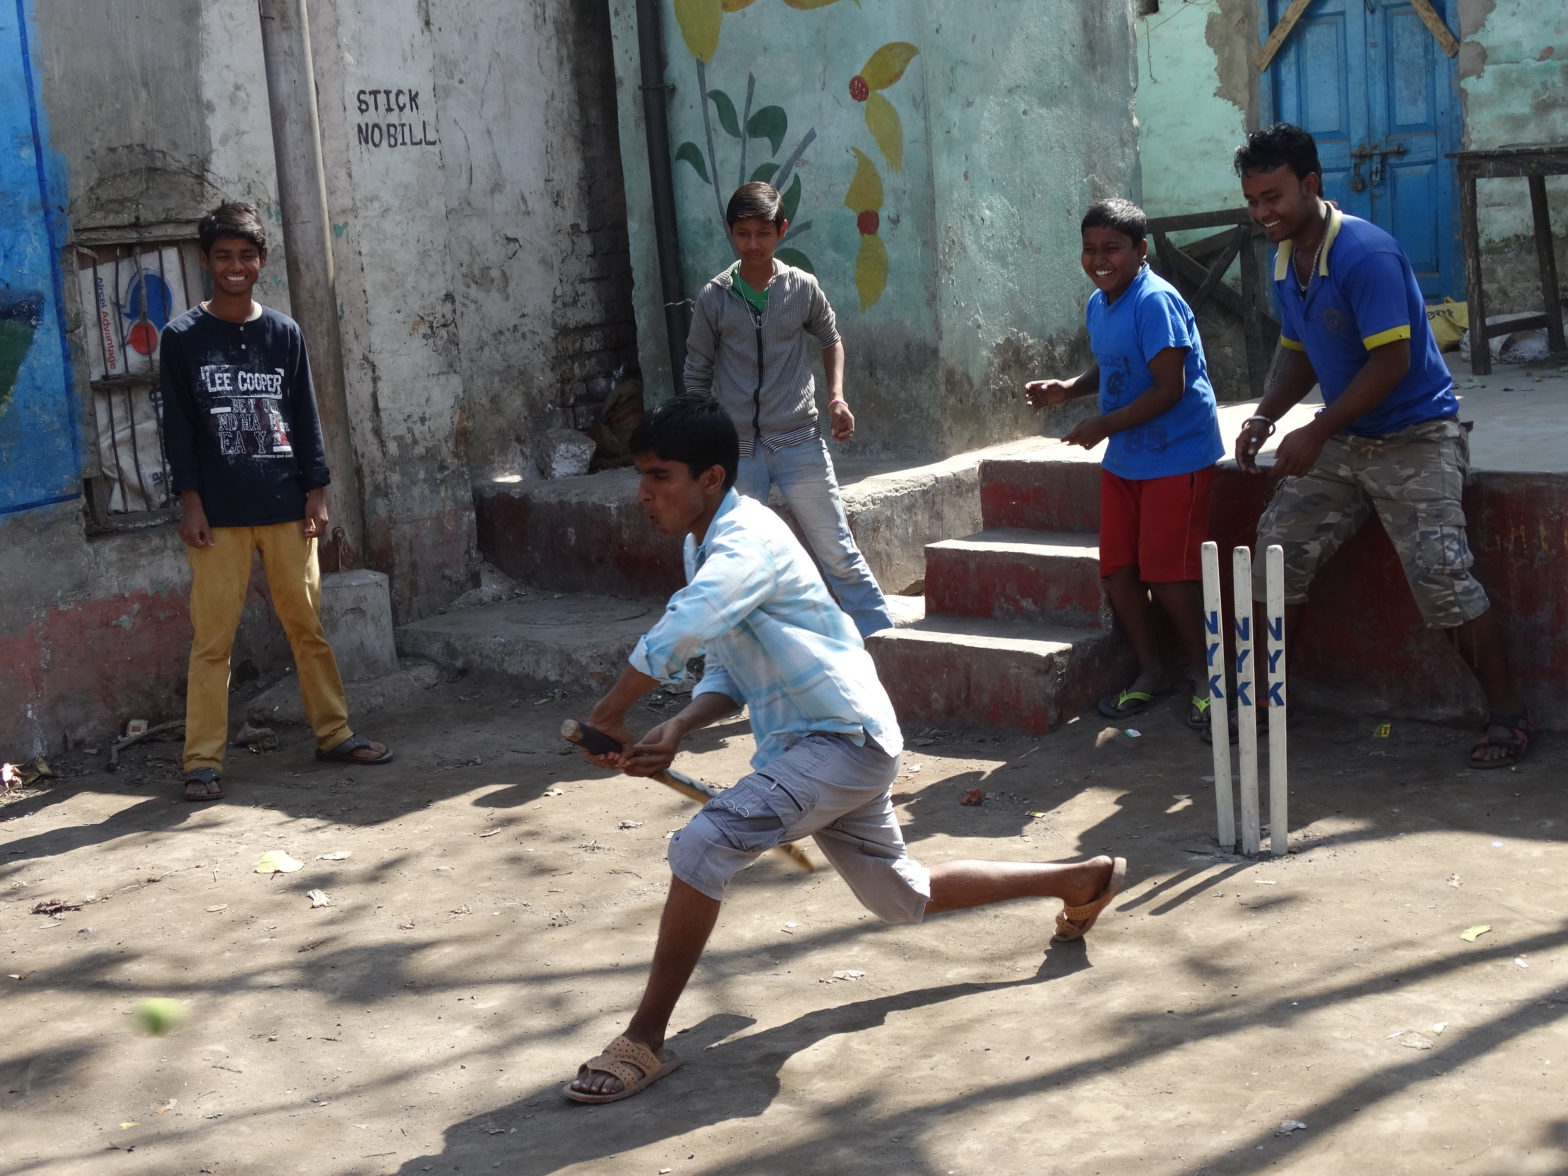 Street cricket chronicles: Deuce ball, Cambis ball, Wall out, Half out, and the great Olympian spirit of West Bengal